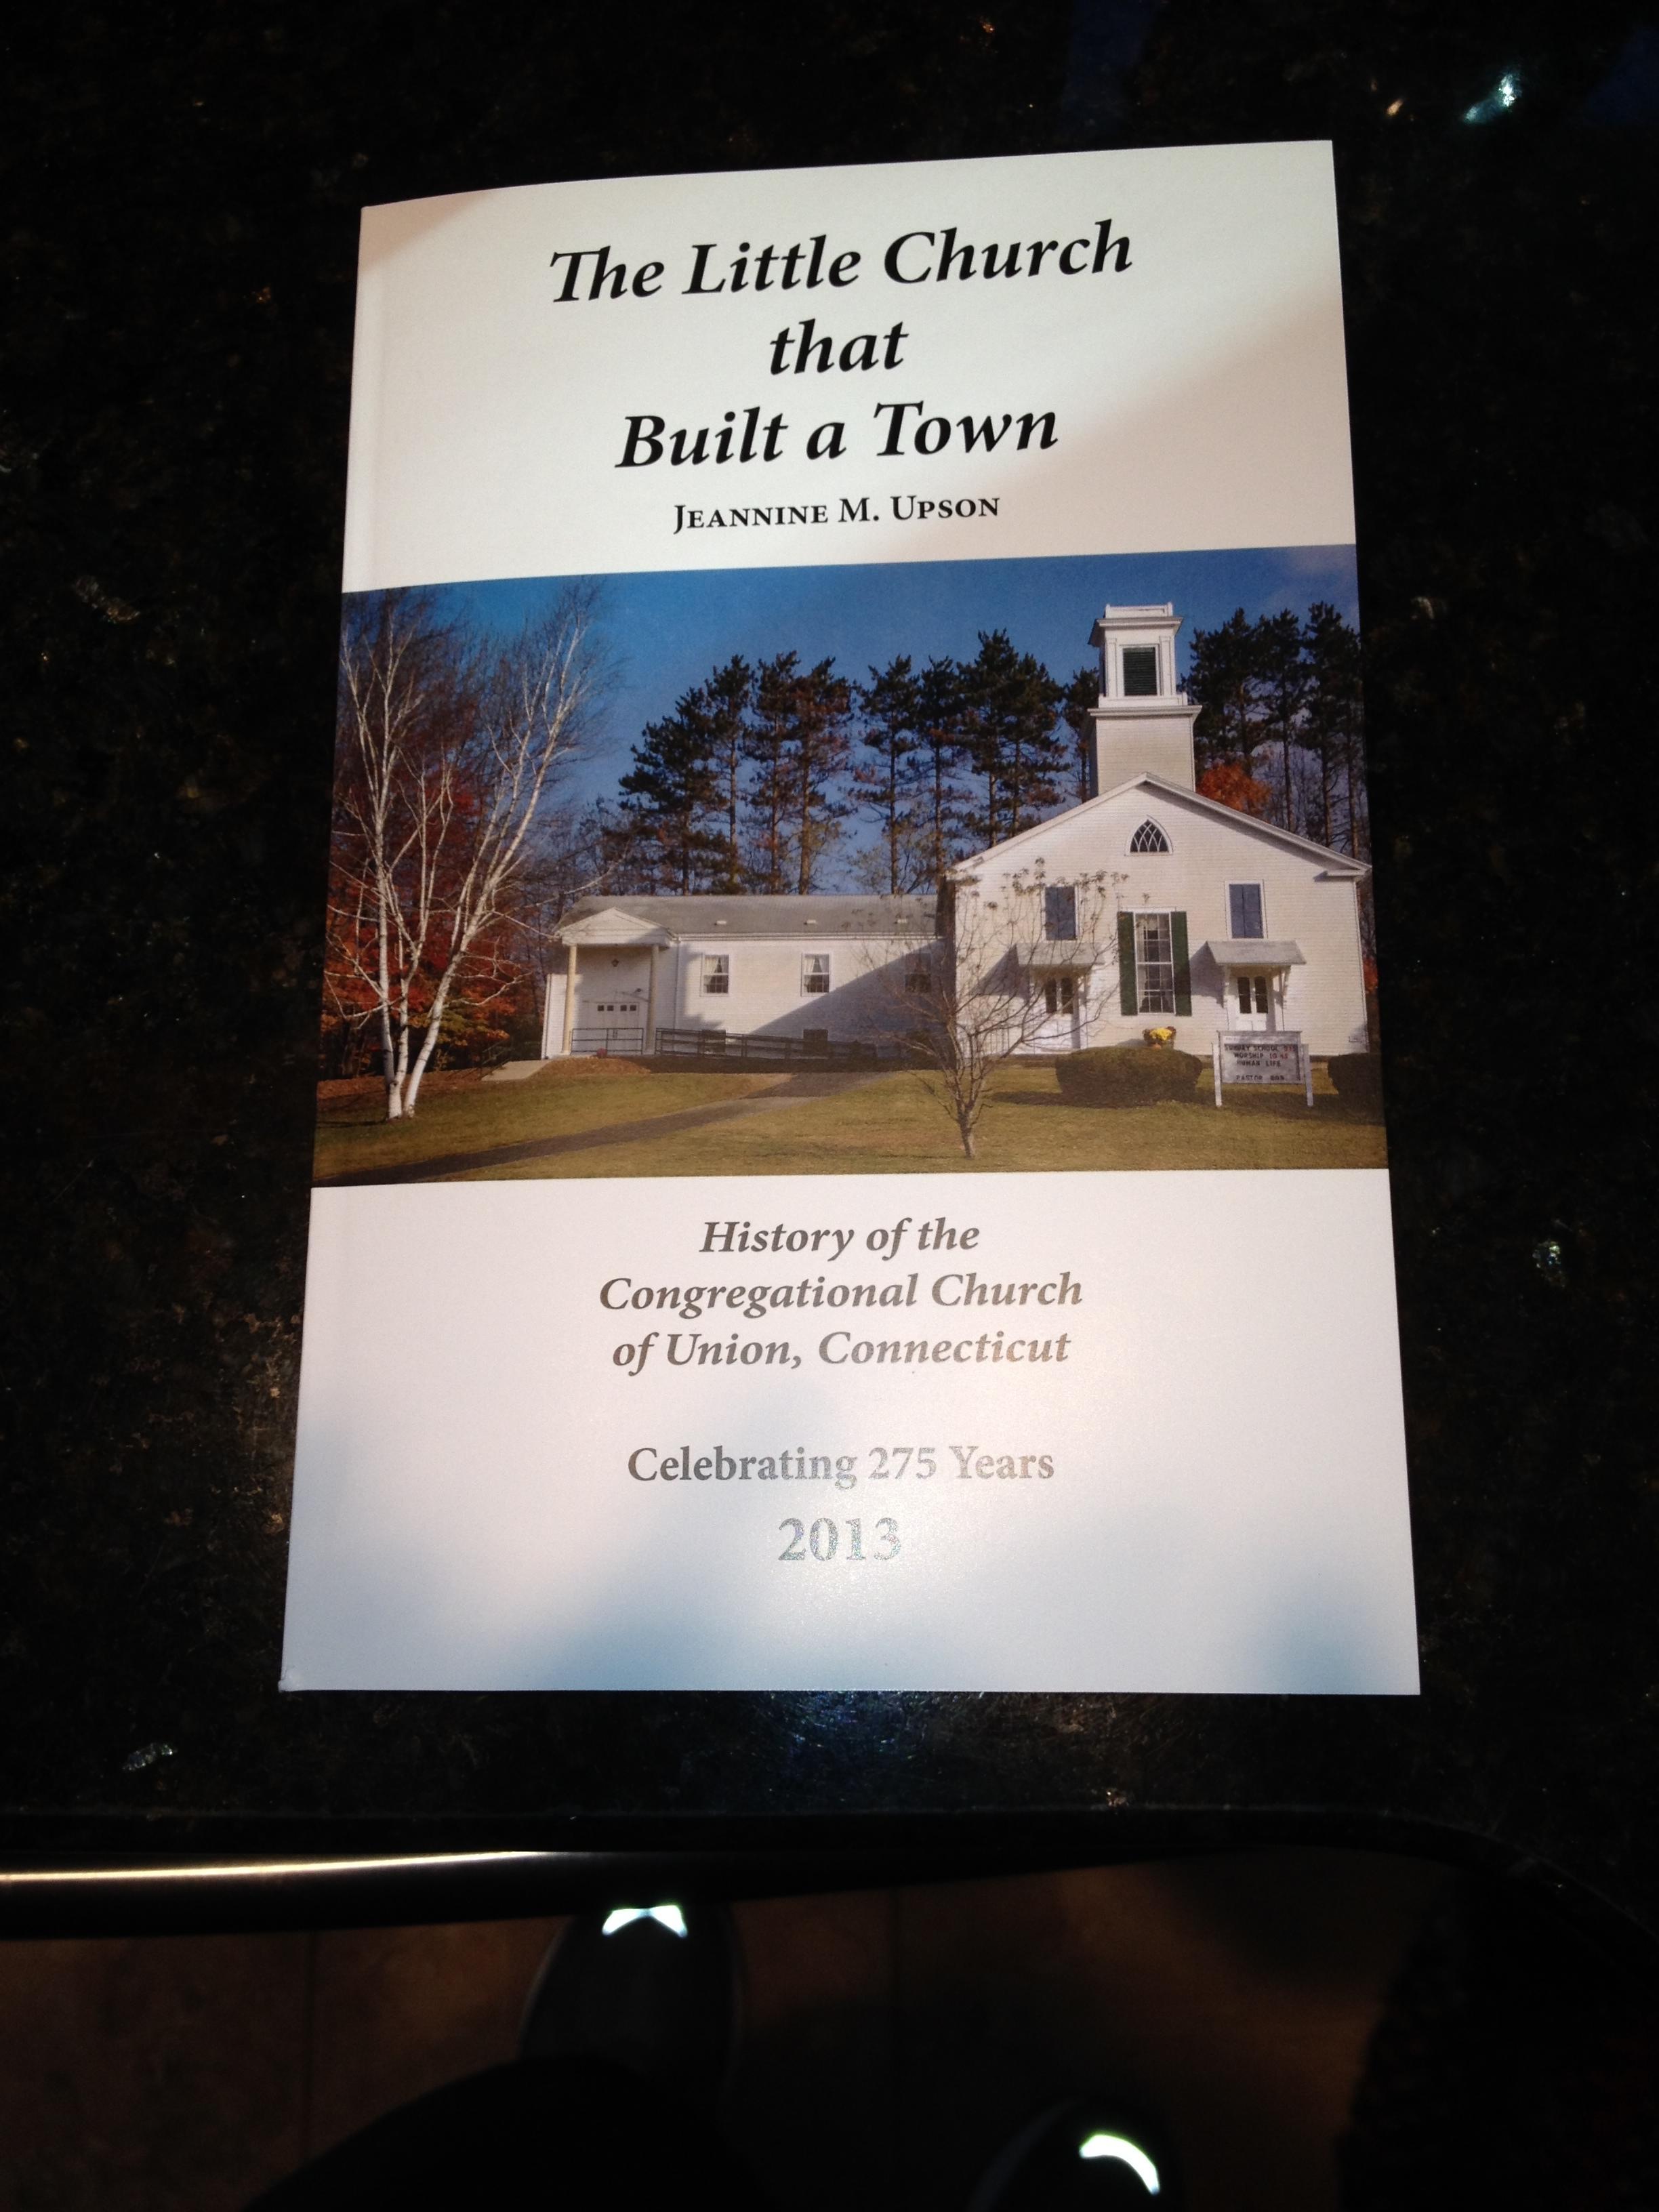  This history of the Congregational Church of Union was written in 2013 to celebrate the 275th anniversary of our church.